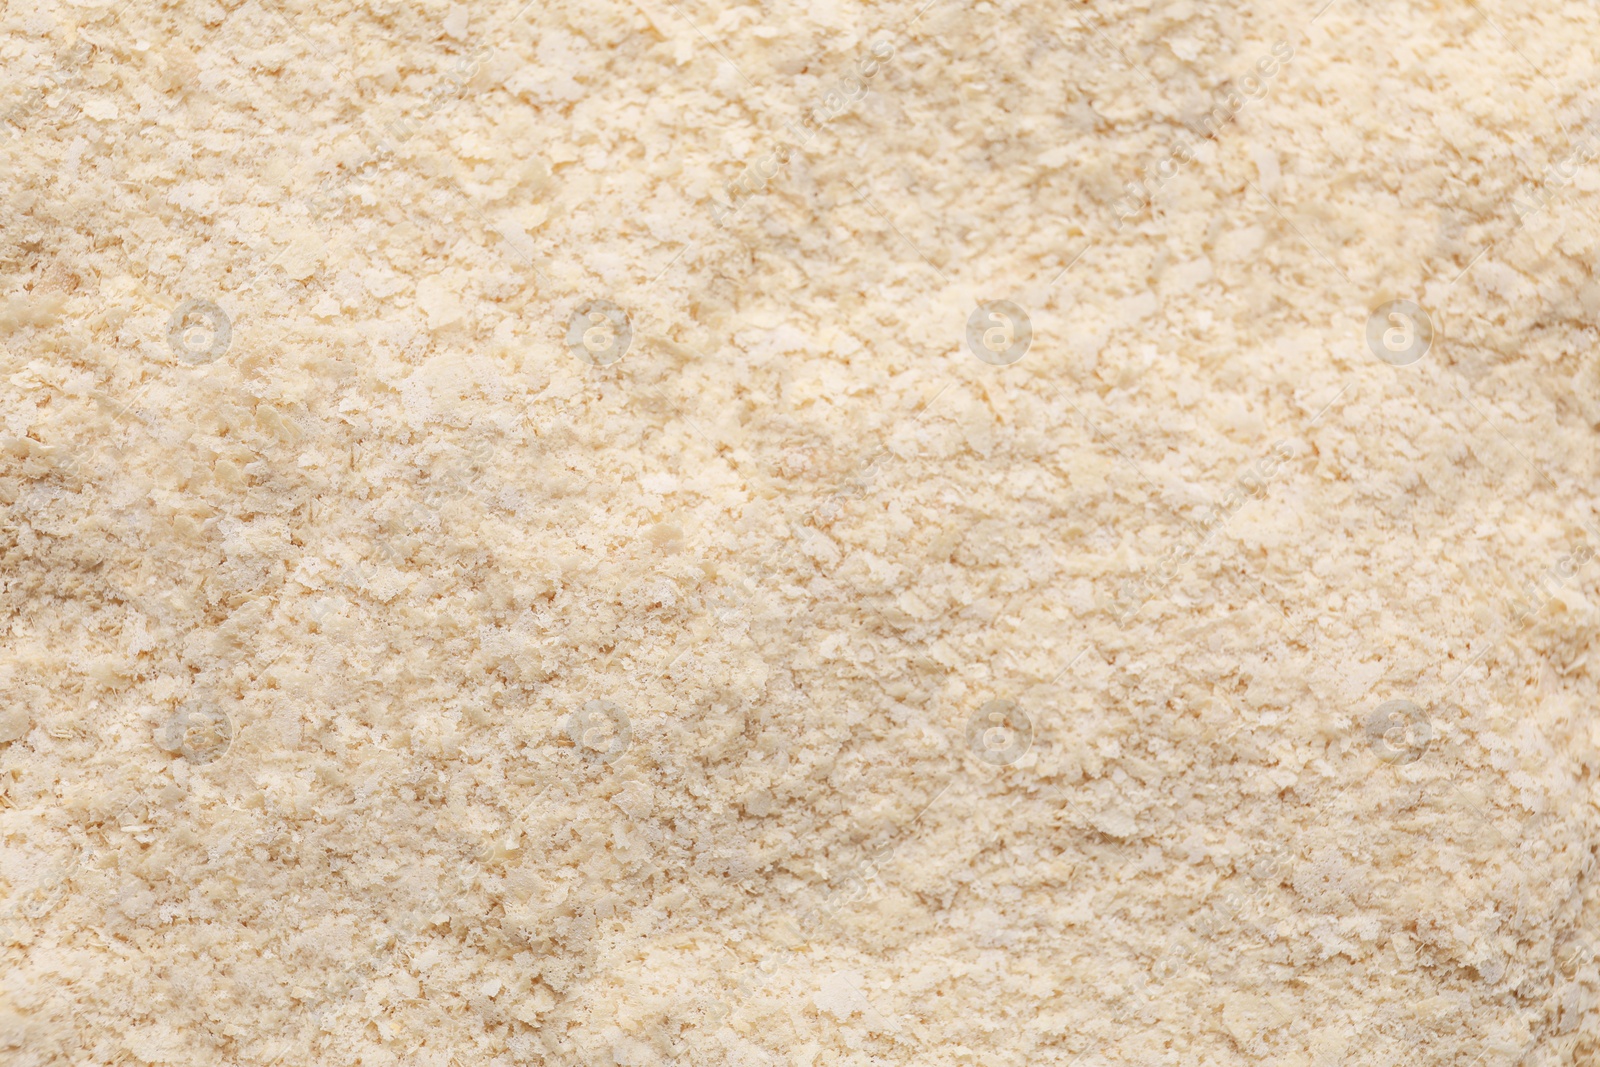 Photo of Brewer`s yeast flakes as background, closeup view